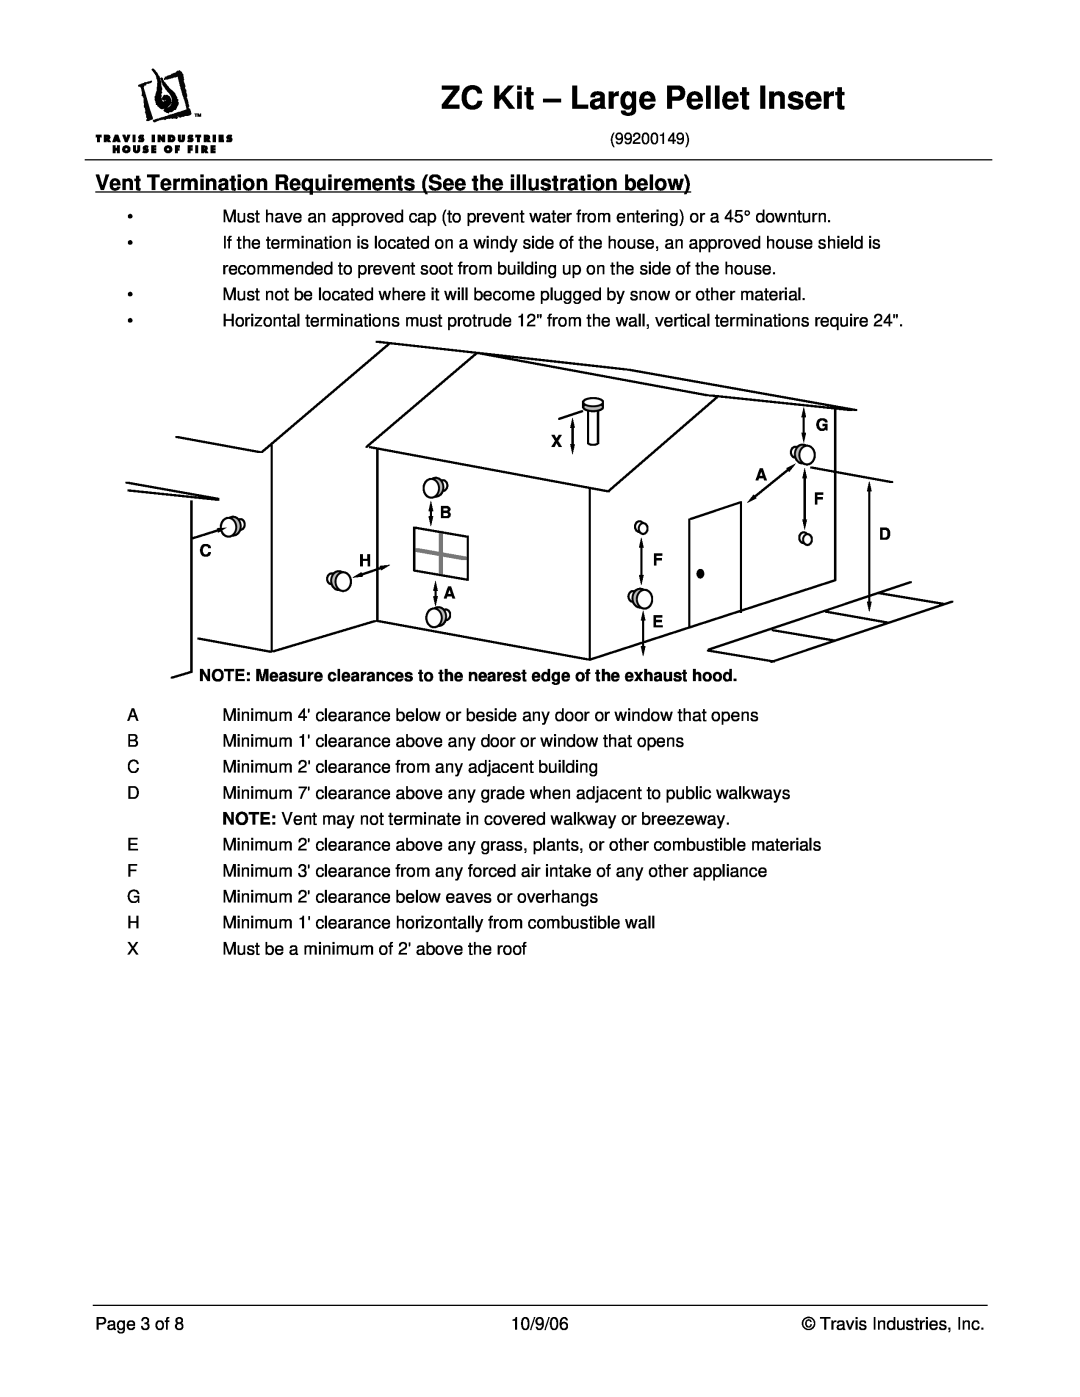 Avalon Stoves 99200149 dimensions Vent Termination Requirements See the illustration below, ZC Kit - Large Pellet Insert 